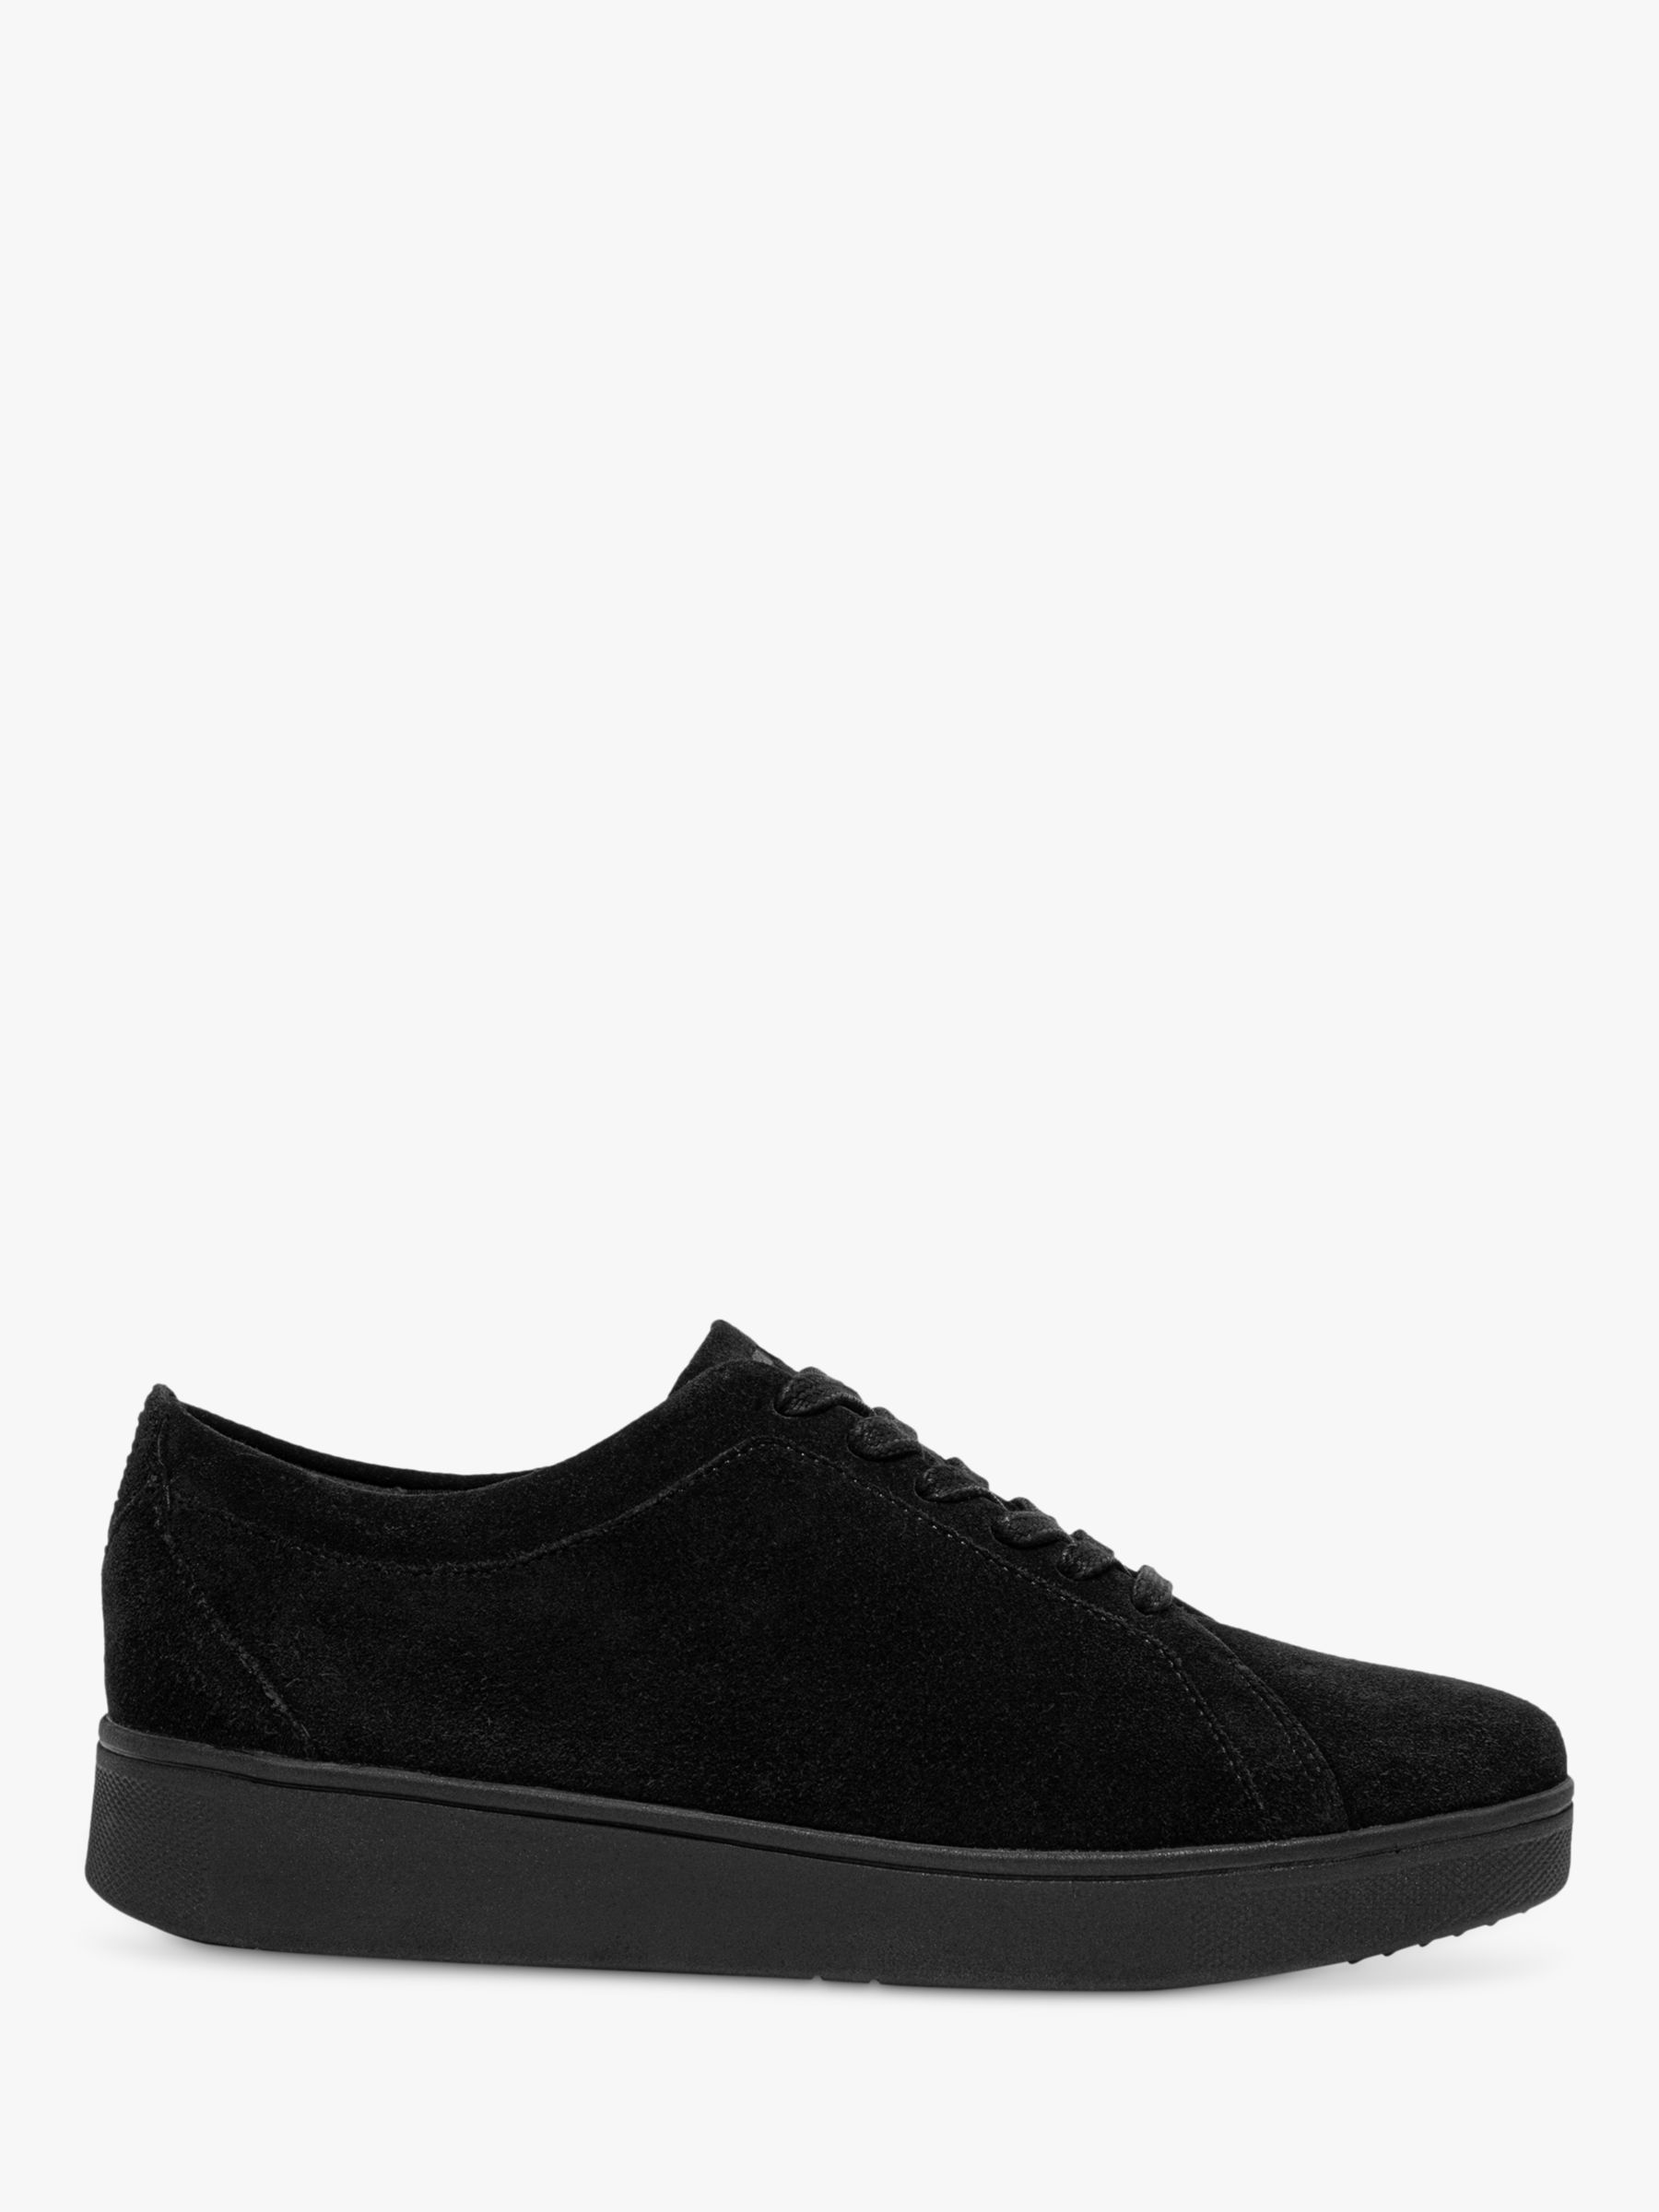 FitFlop Rally Suede Lace Up Trainers, Black